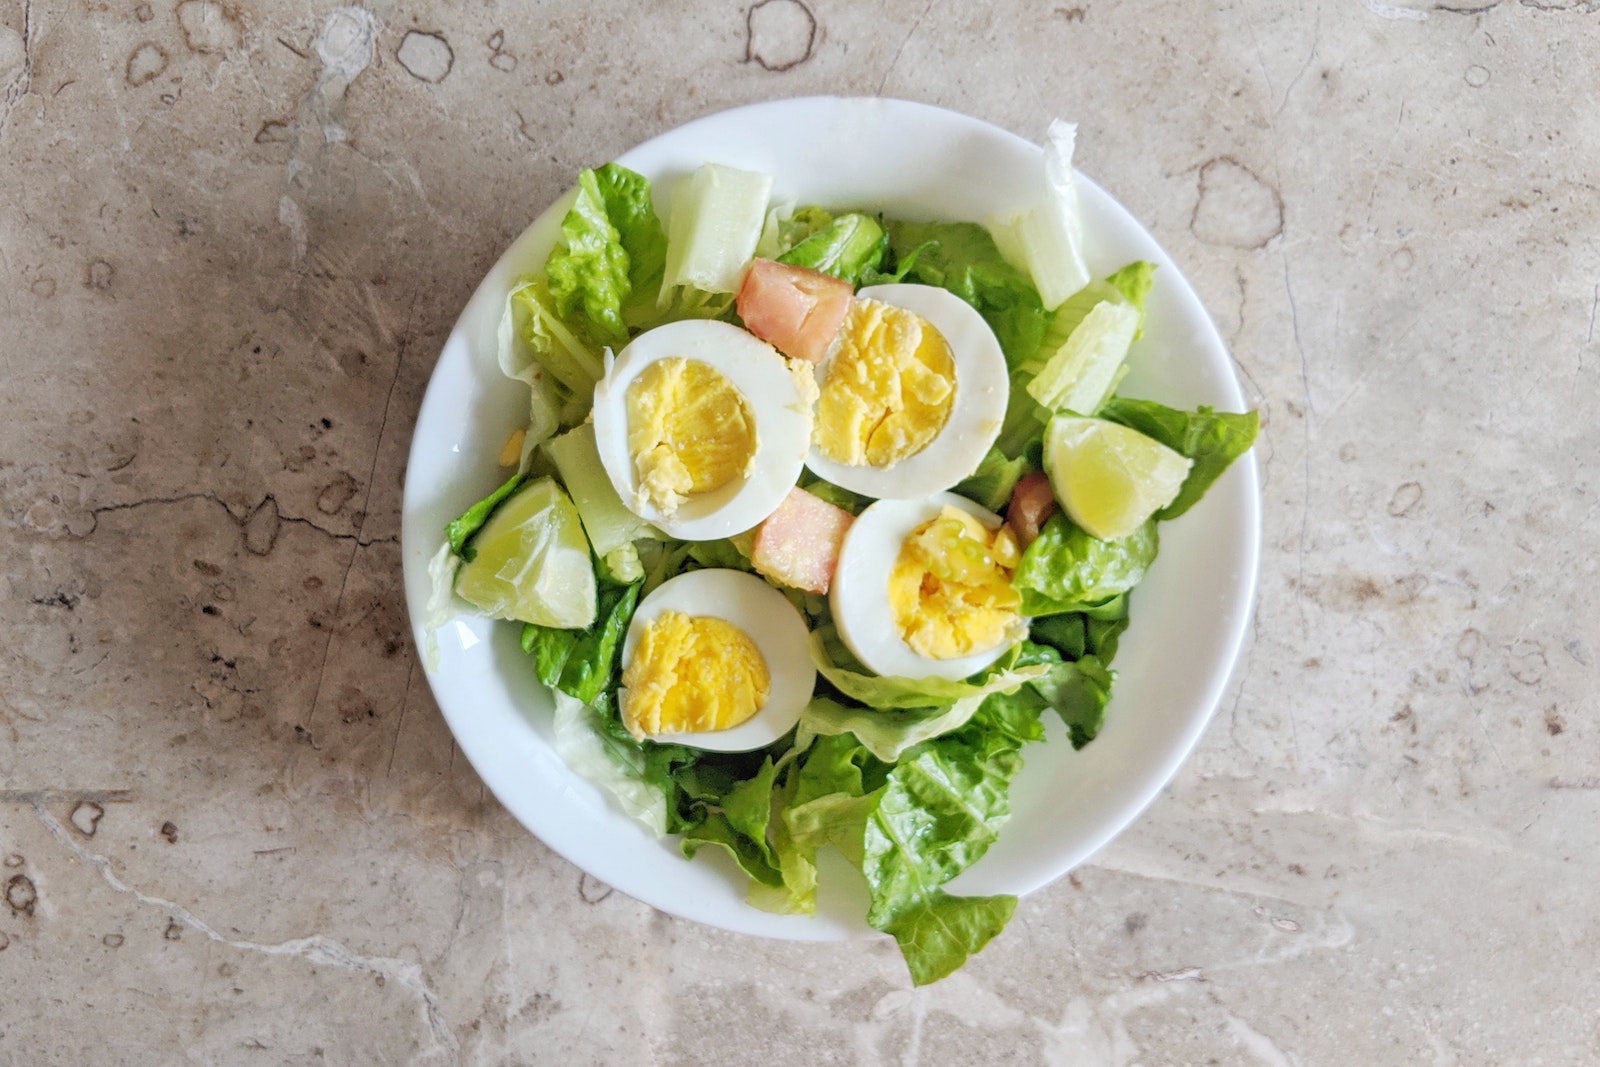 Fresh Vegetable Salad with Boiled Eggs on White Ceramic Plate